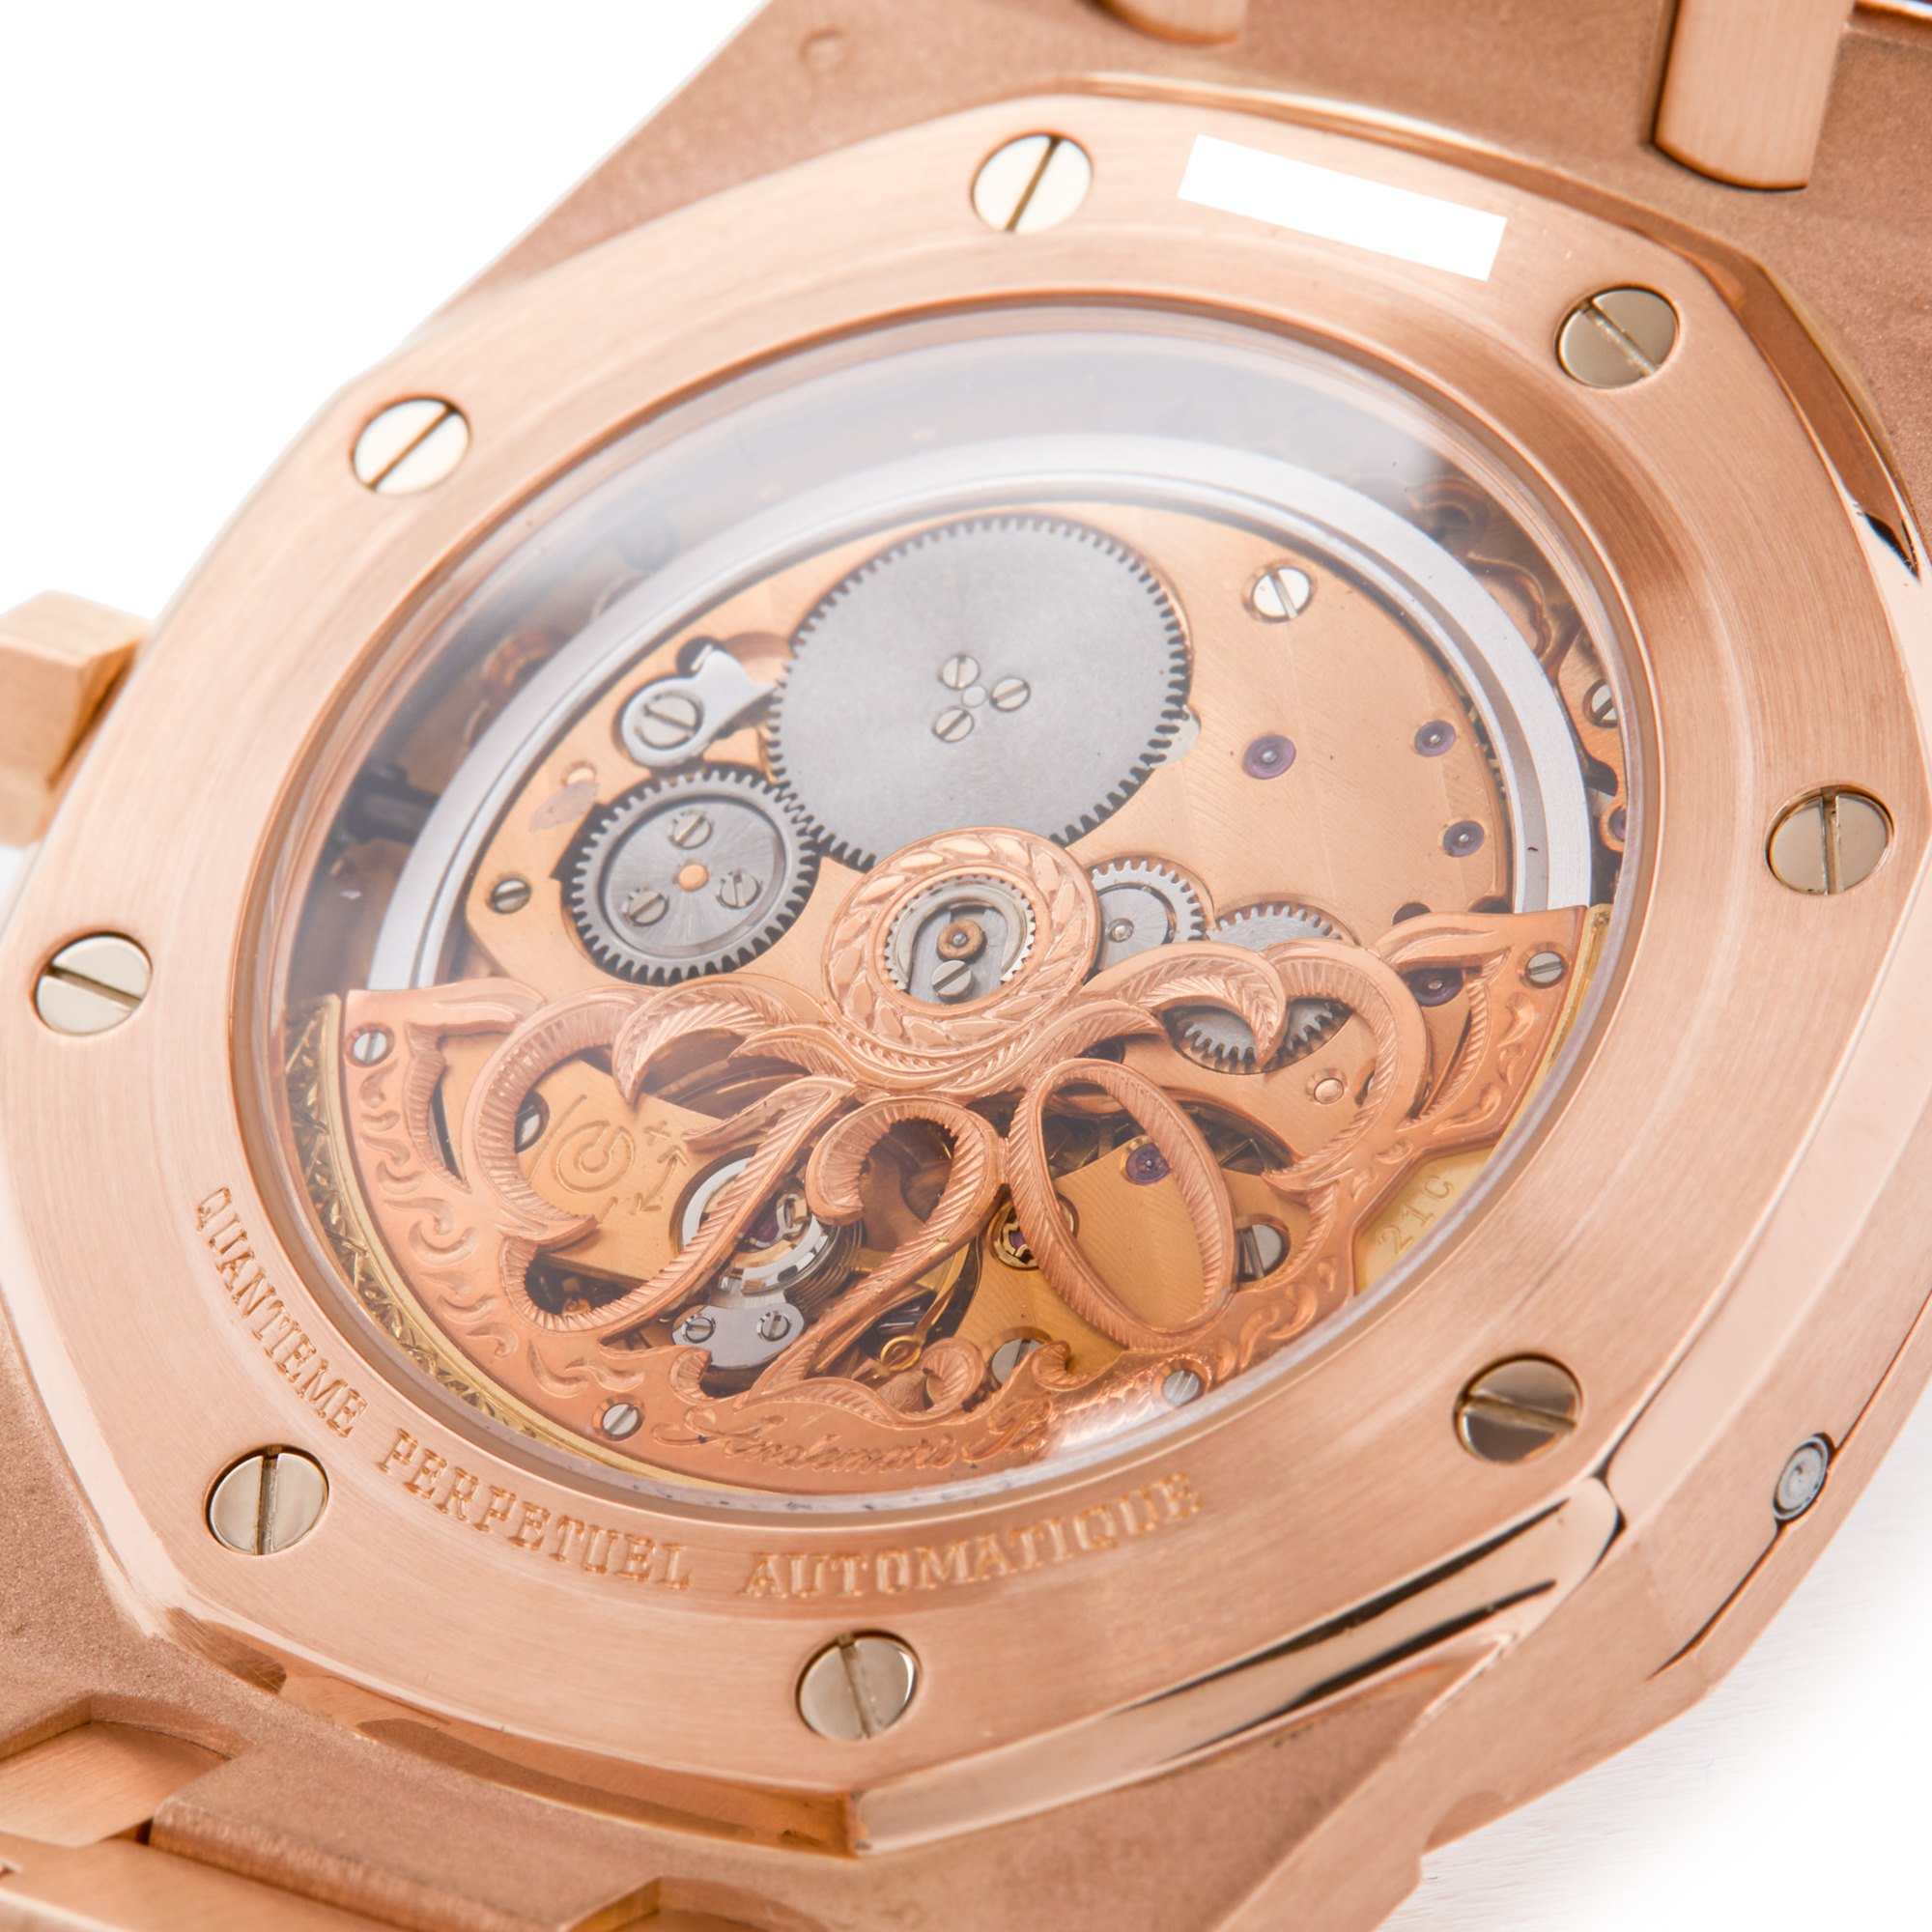 Audemars Piguet Royal Oak Quantieme Perpetual Limited Edition Of 120 Pieces 18K Rose Gold - 25810OR.OO.0944OR.01 Rose Gold 25810OR.OO.0944OR.01